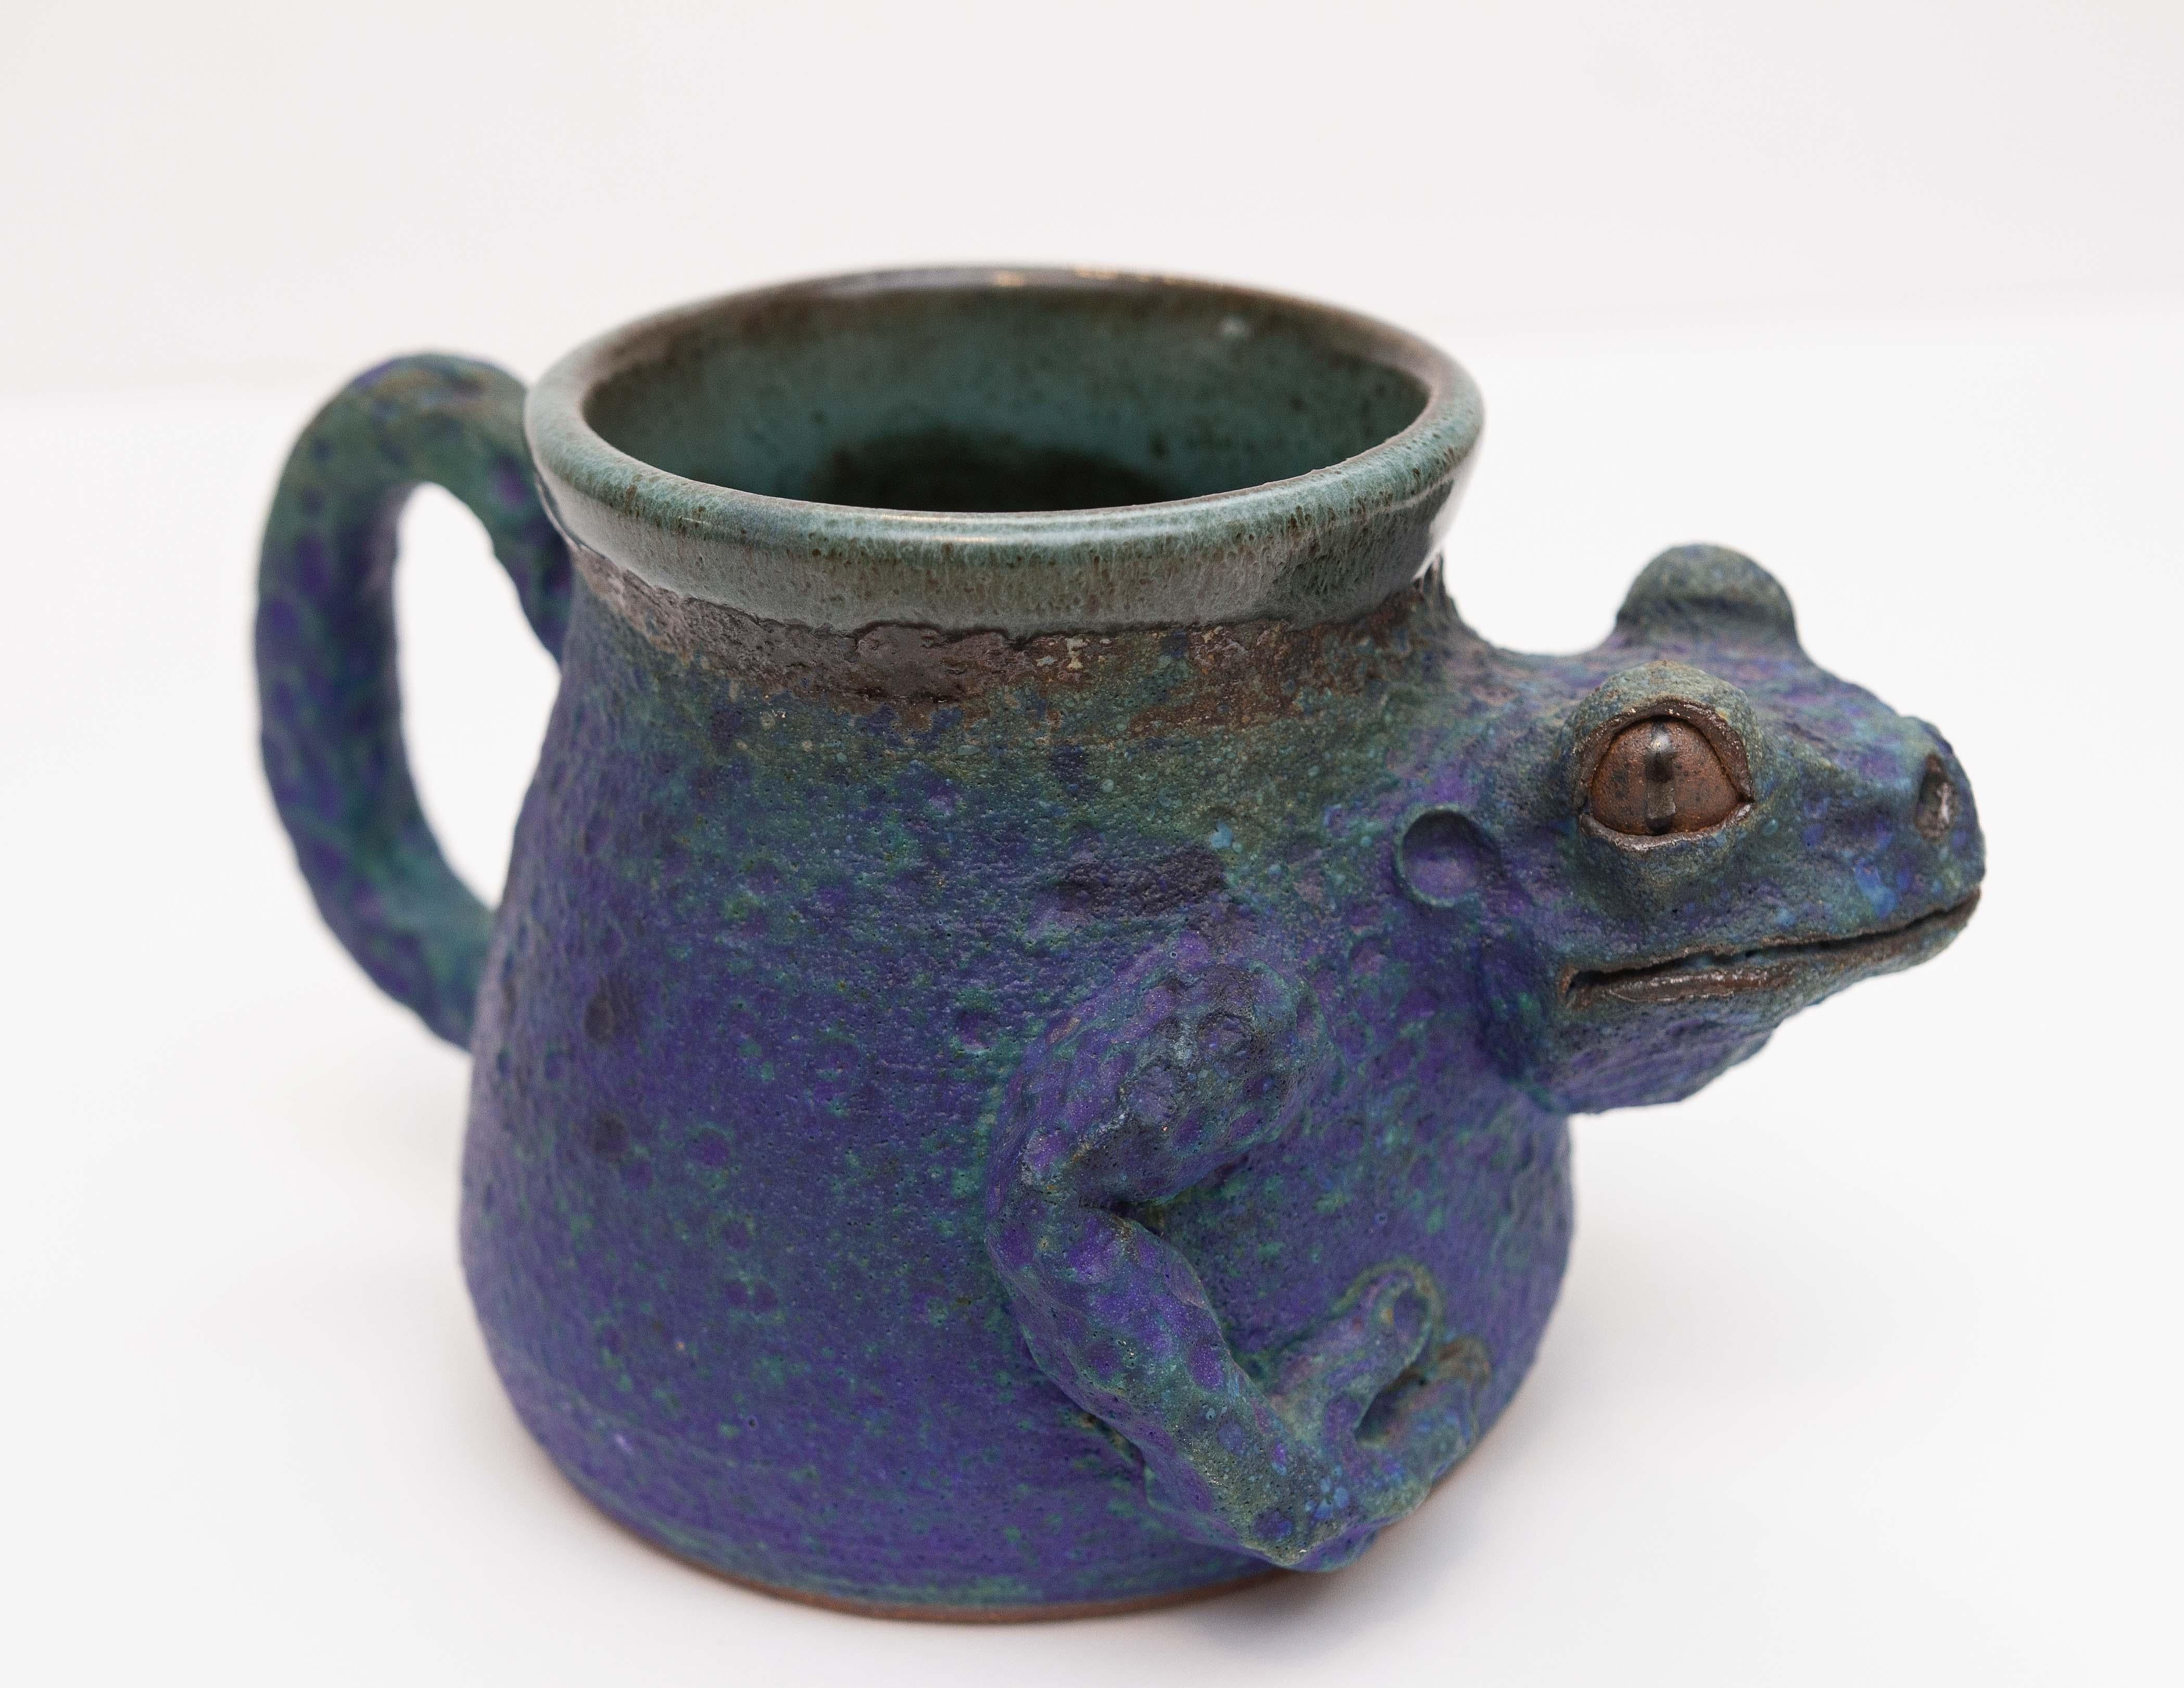 Exotic art pottery frog mug. Rich blue and green colors. Hand made. Signed and dated 1995.